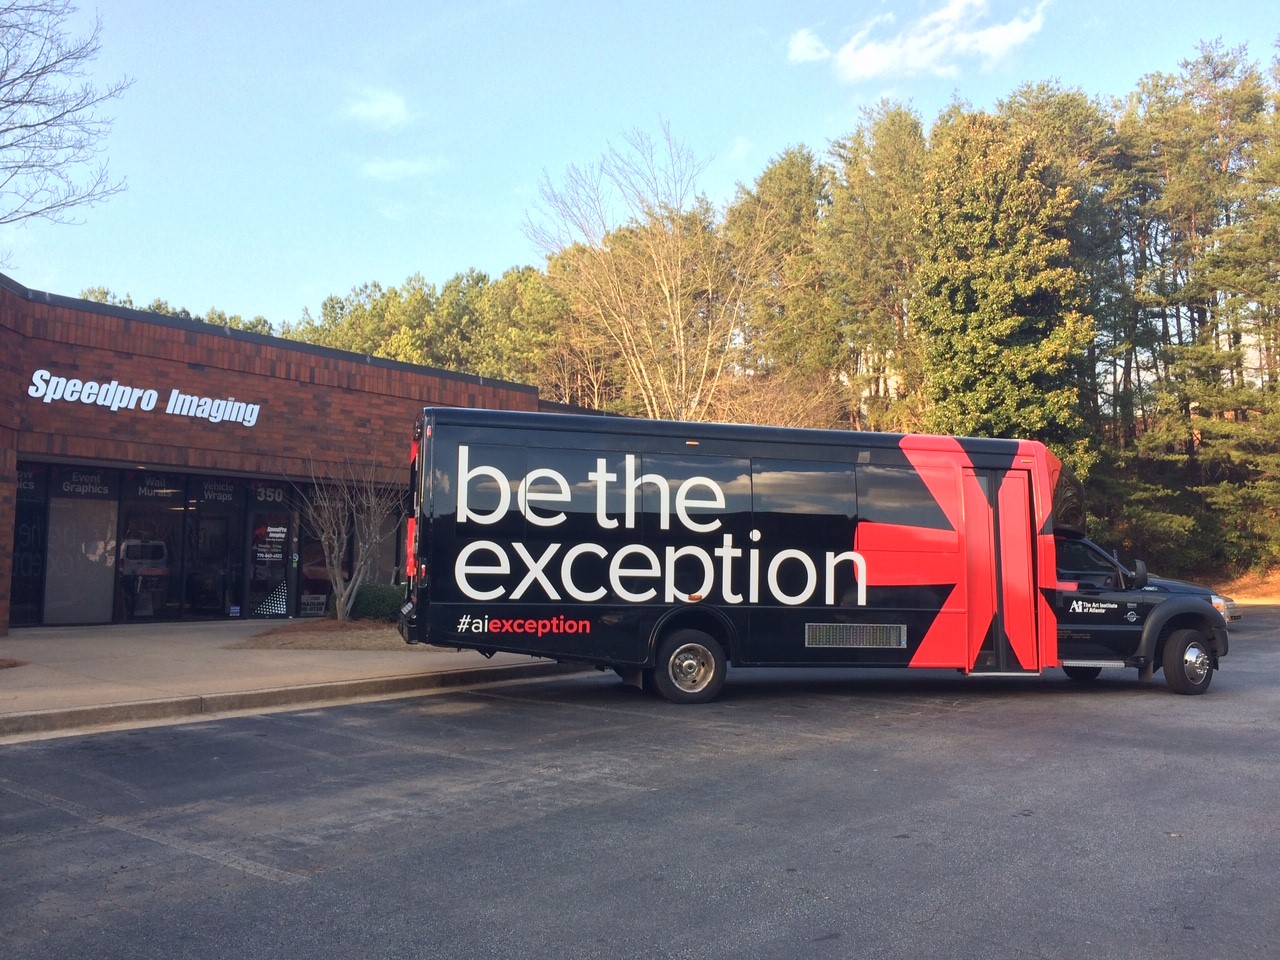 Be the exception bus wrap